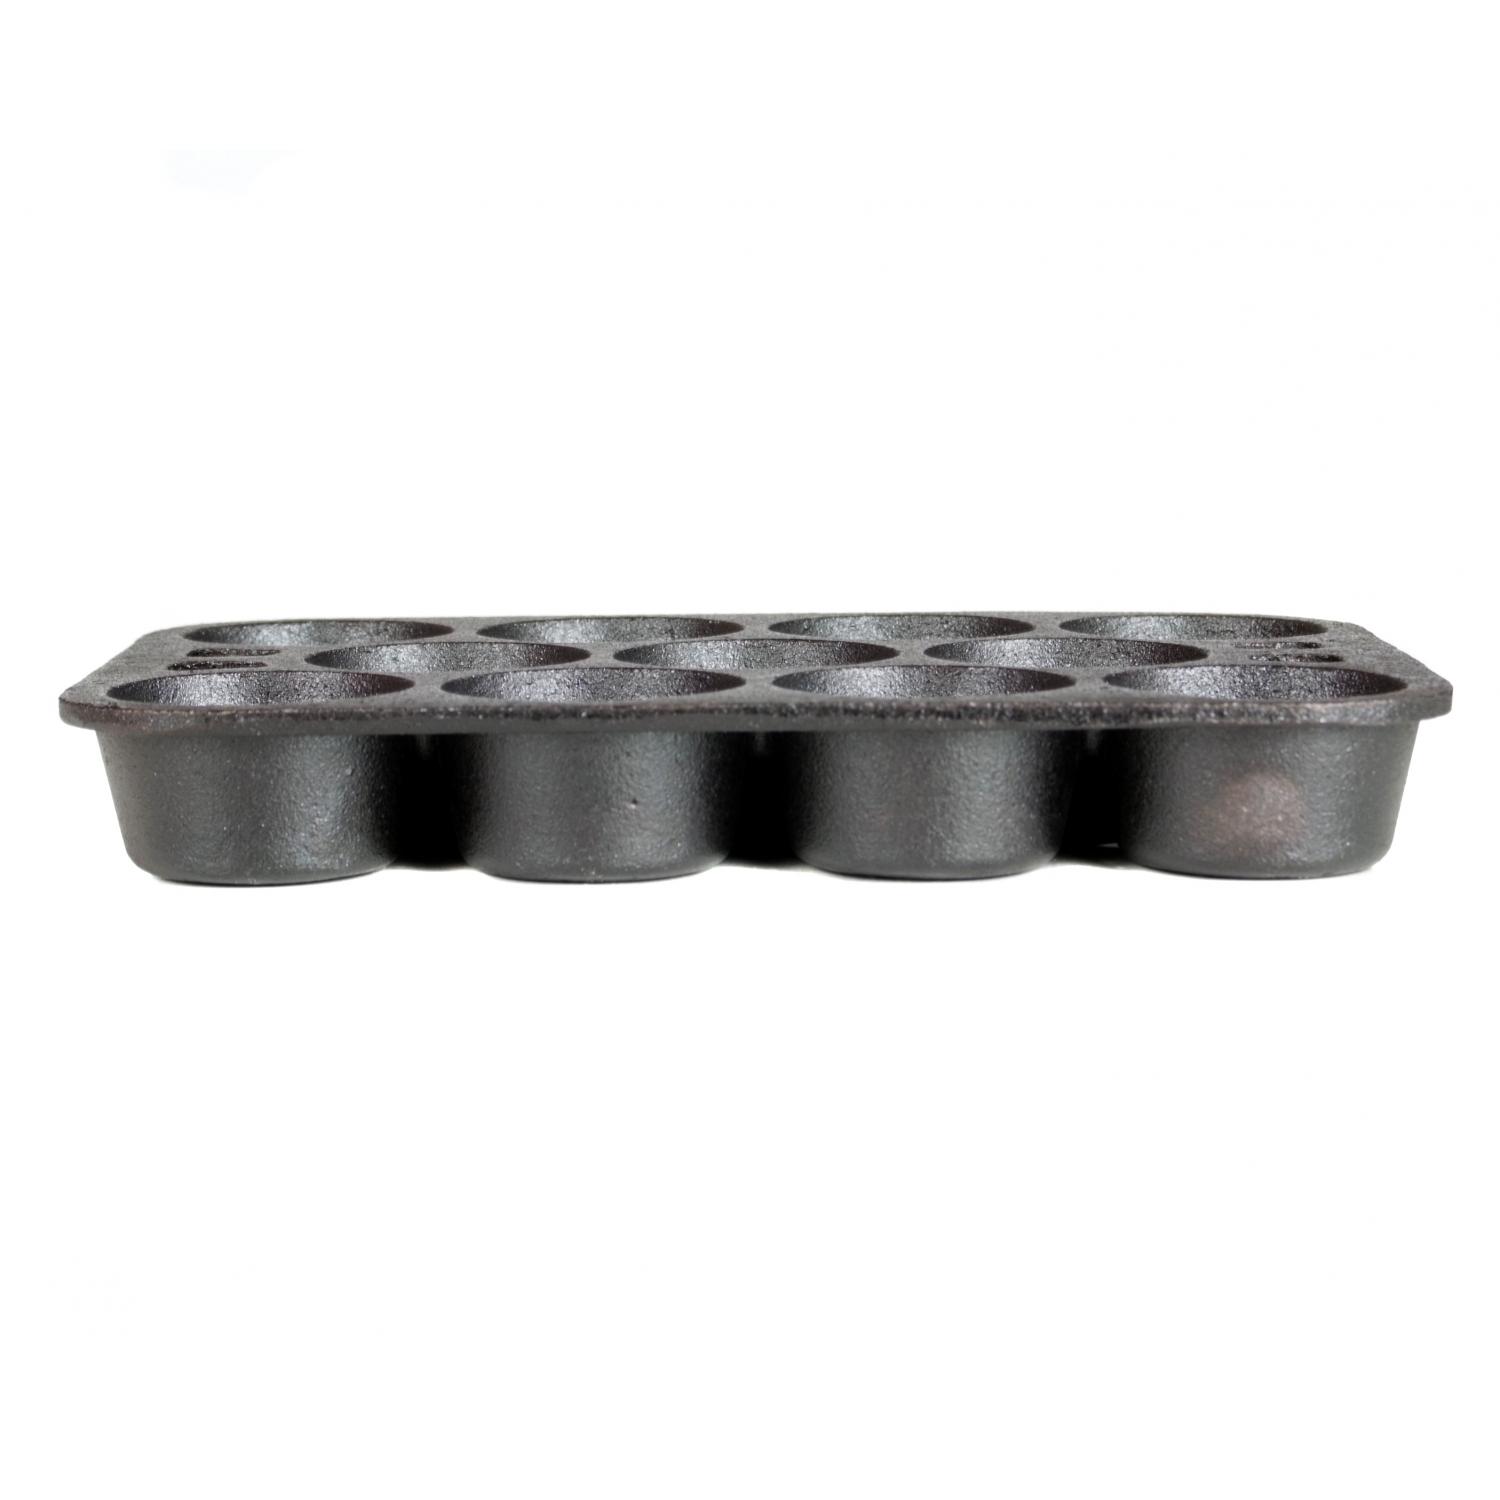 Cast Iron French Roll Muffin Pan No 11 950 A Baking Tray 